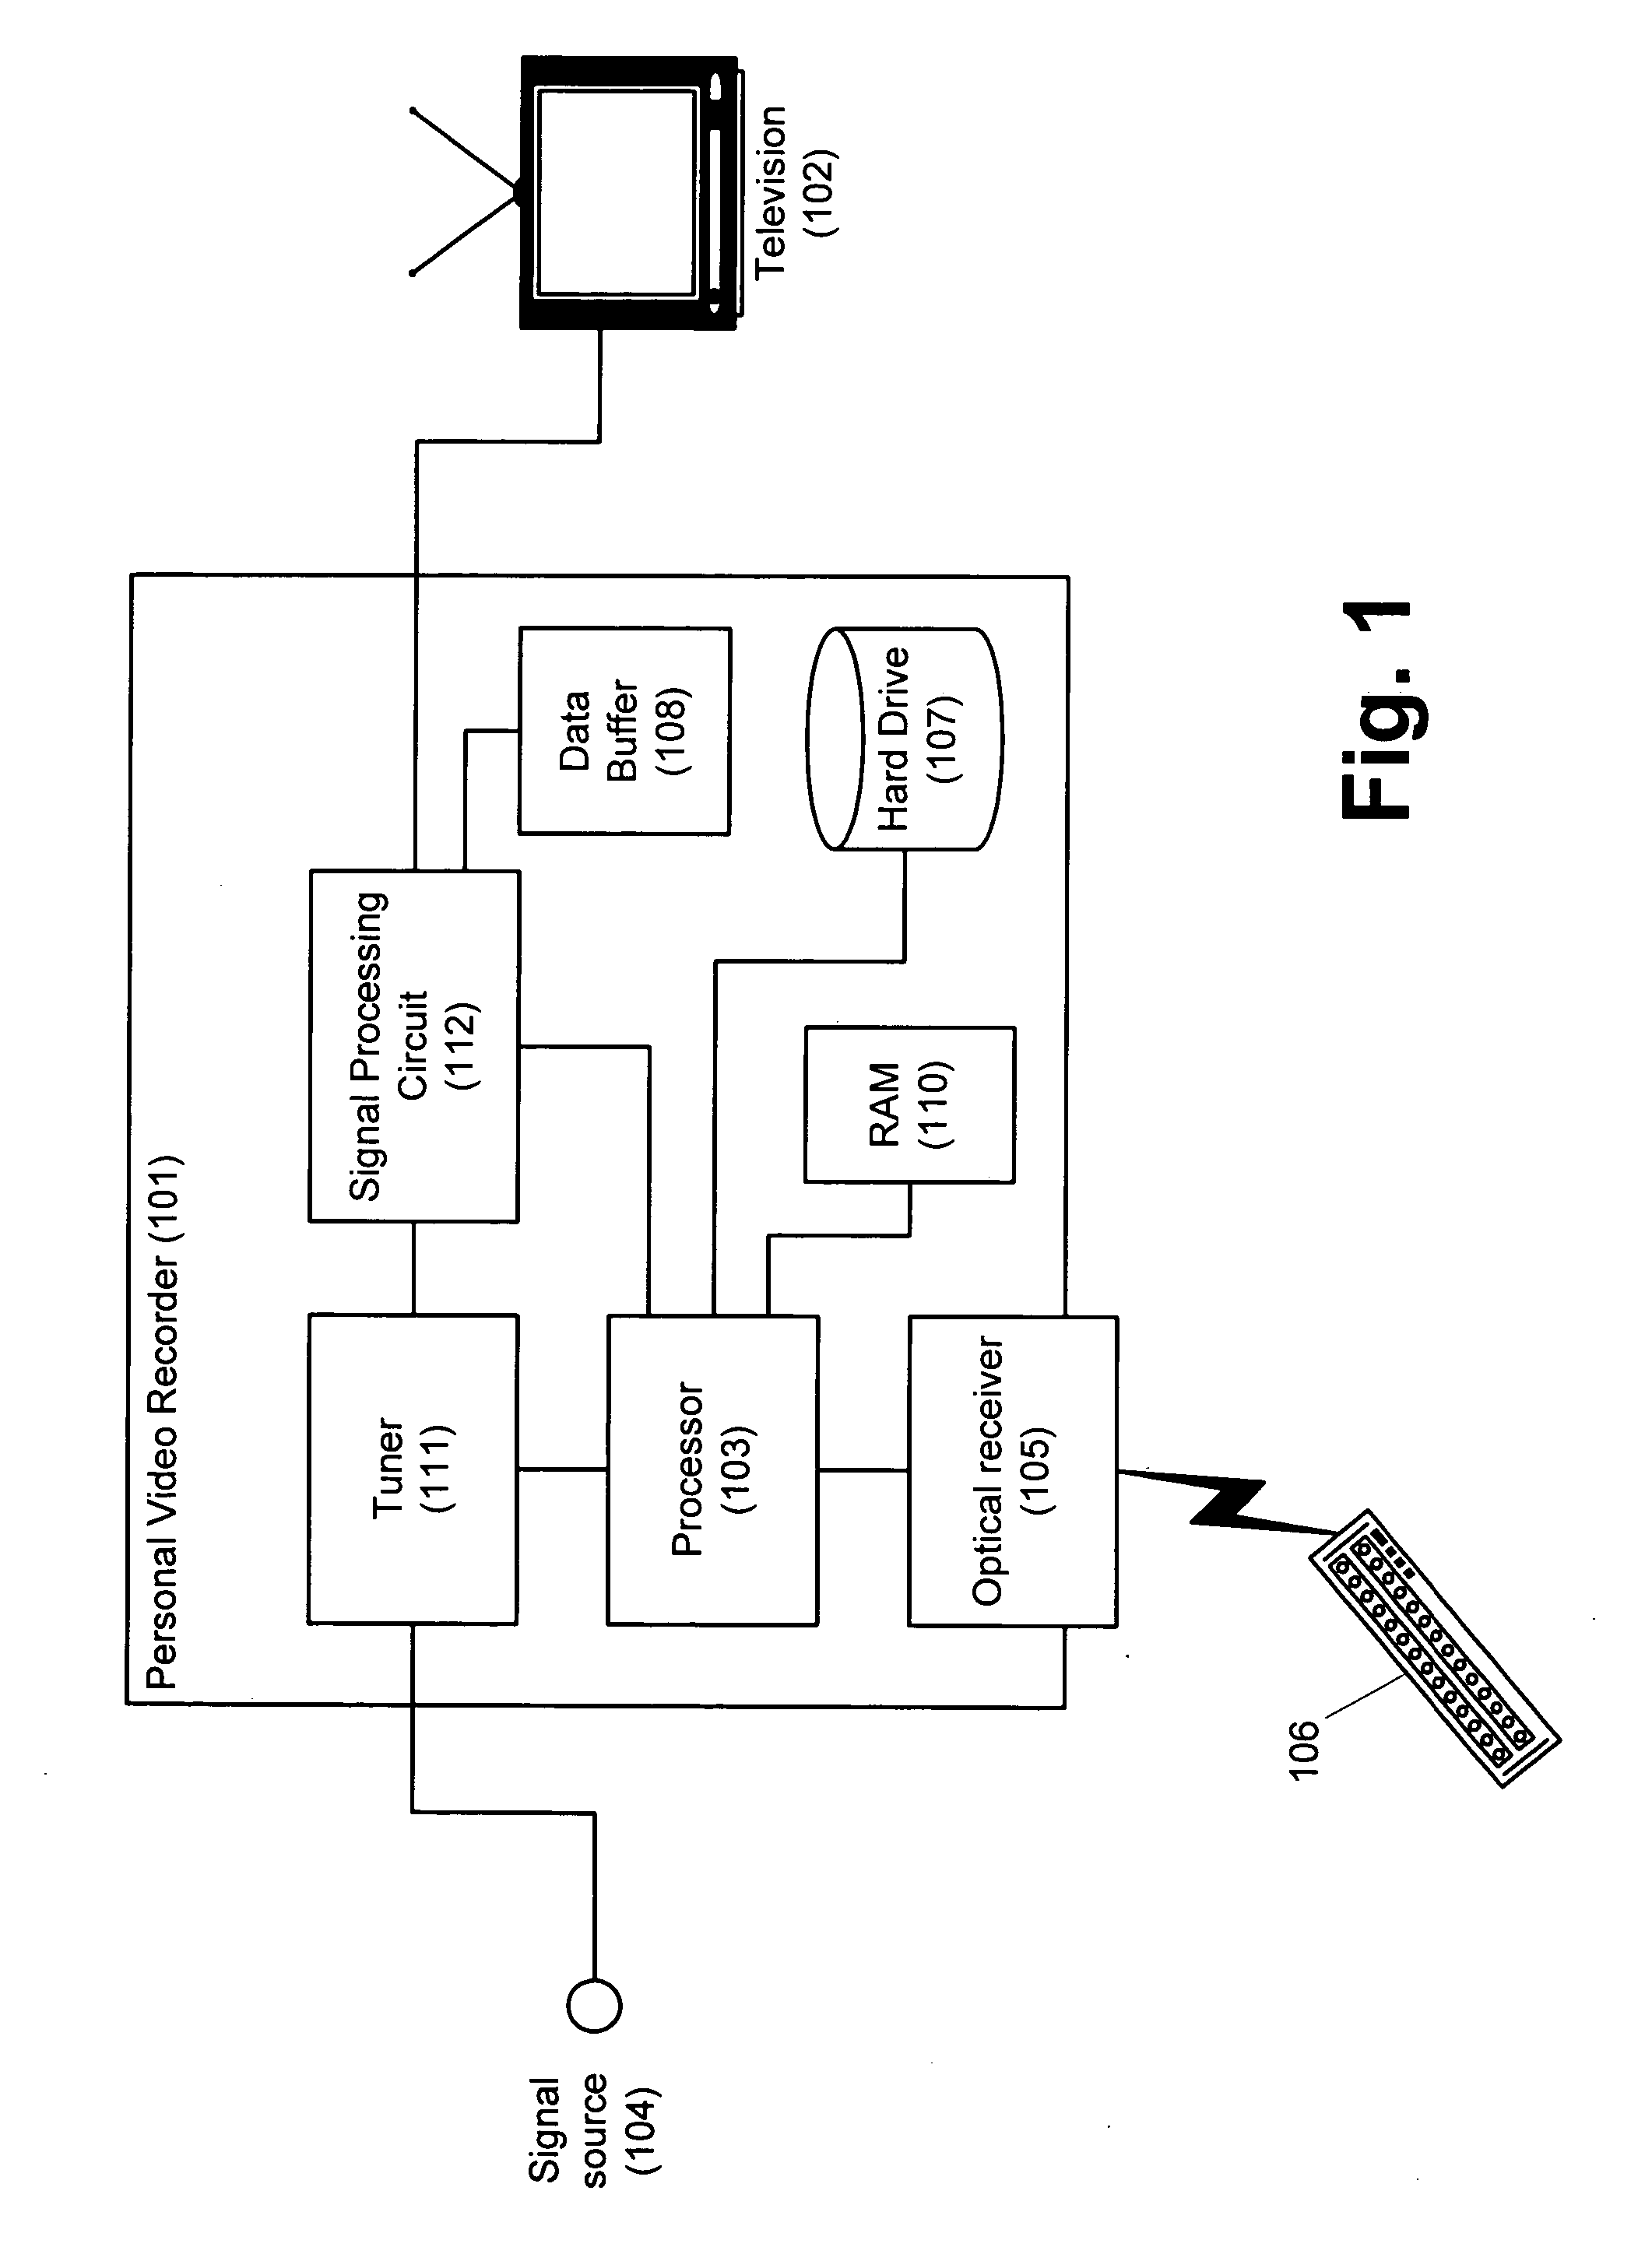 Method and system for providing alternative, less-intrusive advertising that appears during fast forward playback of a recorded video program